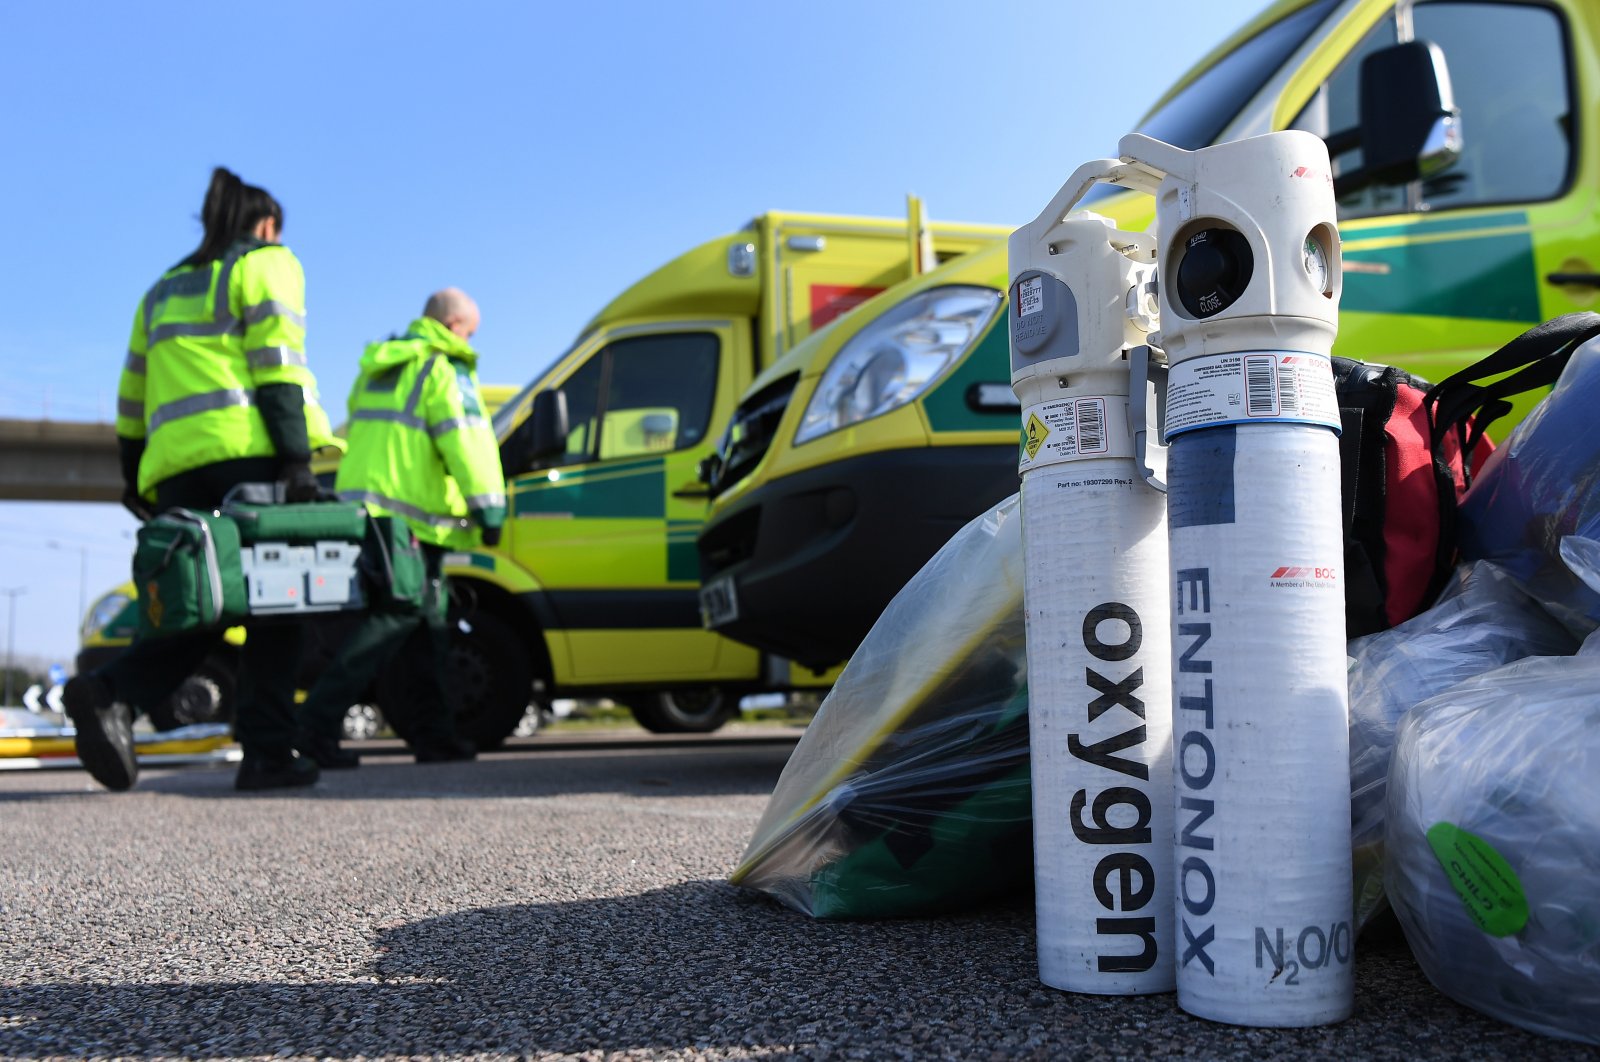 Ambulance workers unload oxygen tanks outside the ExCel Center in London, Saturday, March 28, 2020. (EPA Photo)